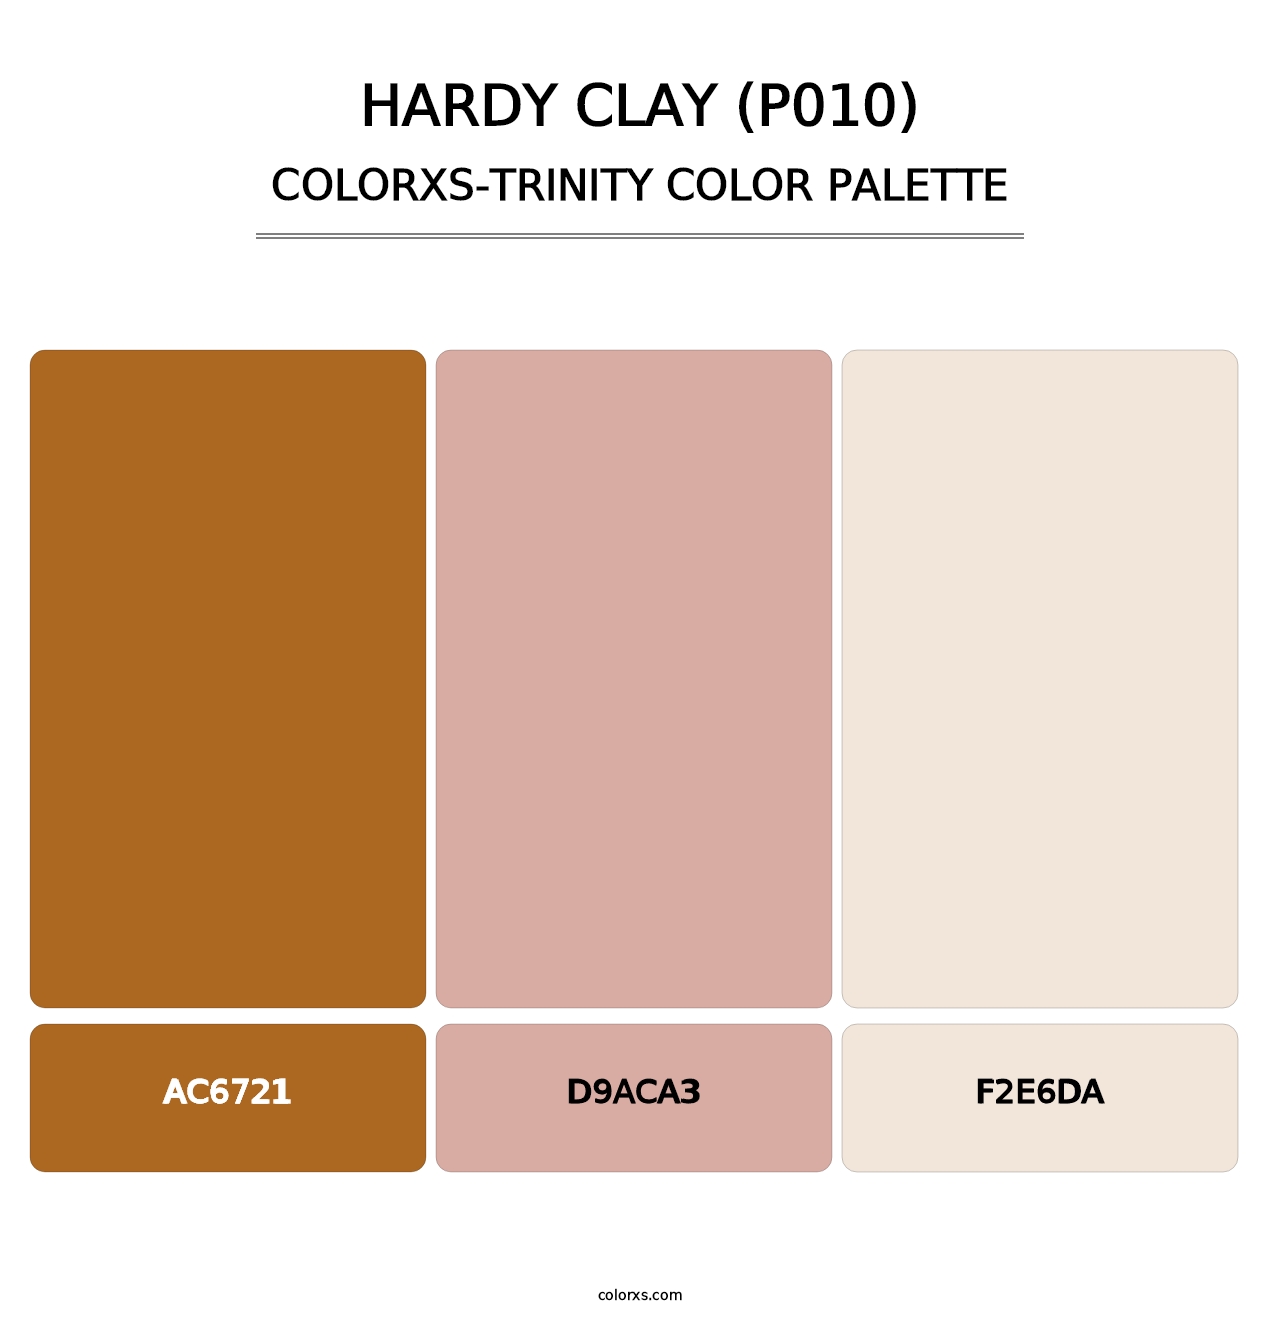 Hardy Clay (P010) - Colorxs Trinity Palette